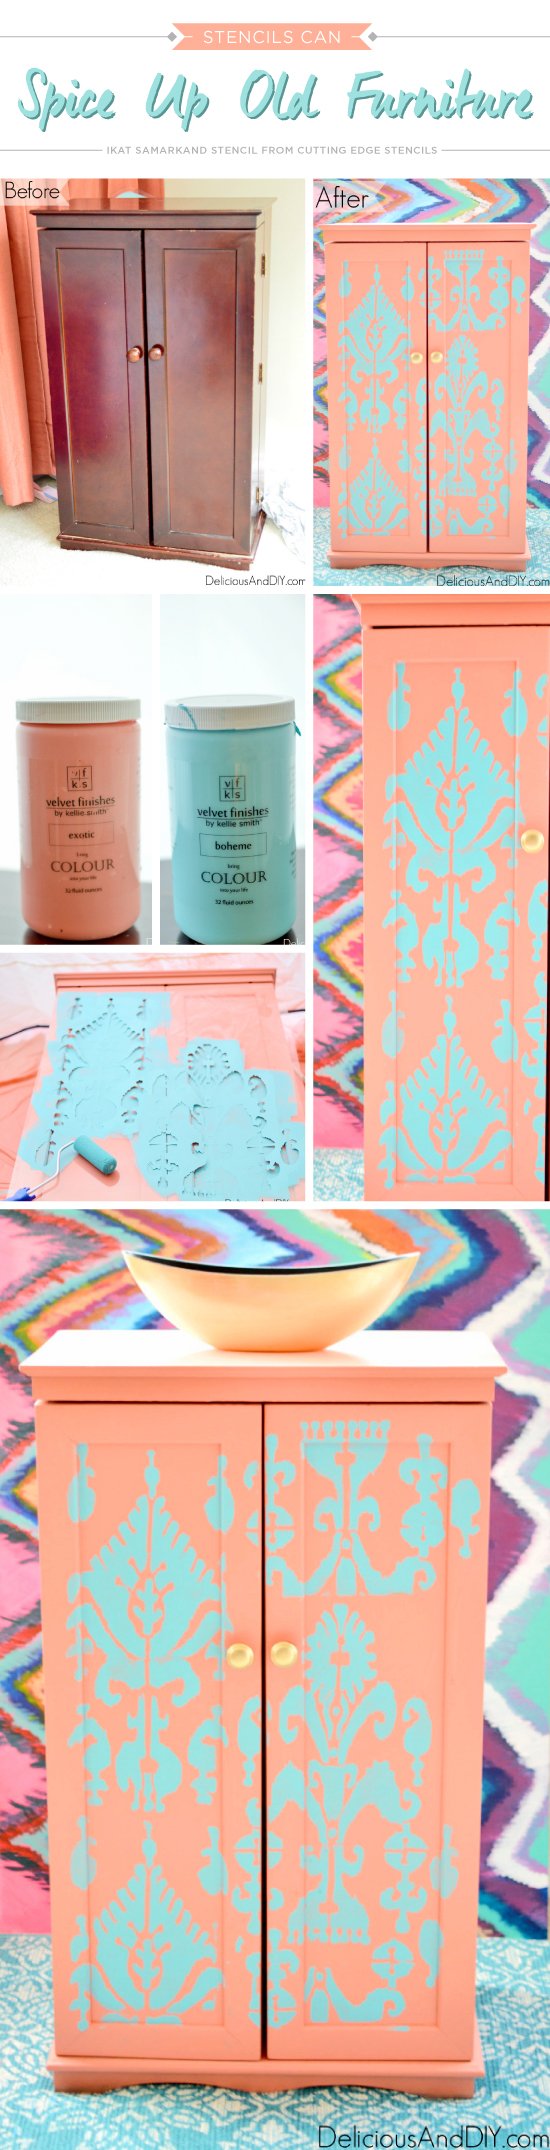 A DIY painted and stenciled cabinet using the Ikat Samarkand Allover Stencil from Cutting Edge Stencils. http://www.cuttingedgestencils.com/ikat-stencil-uzbek.html